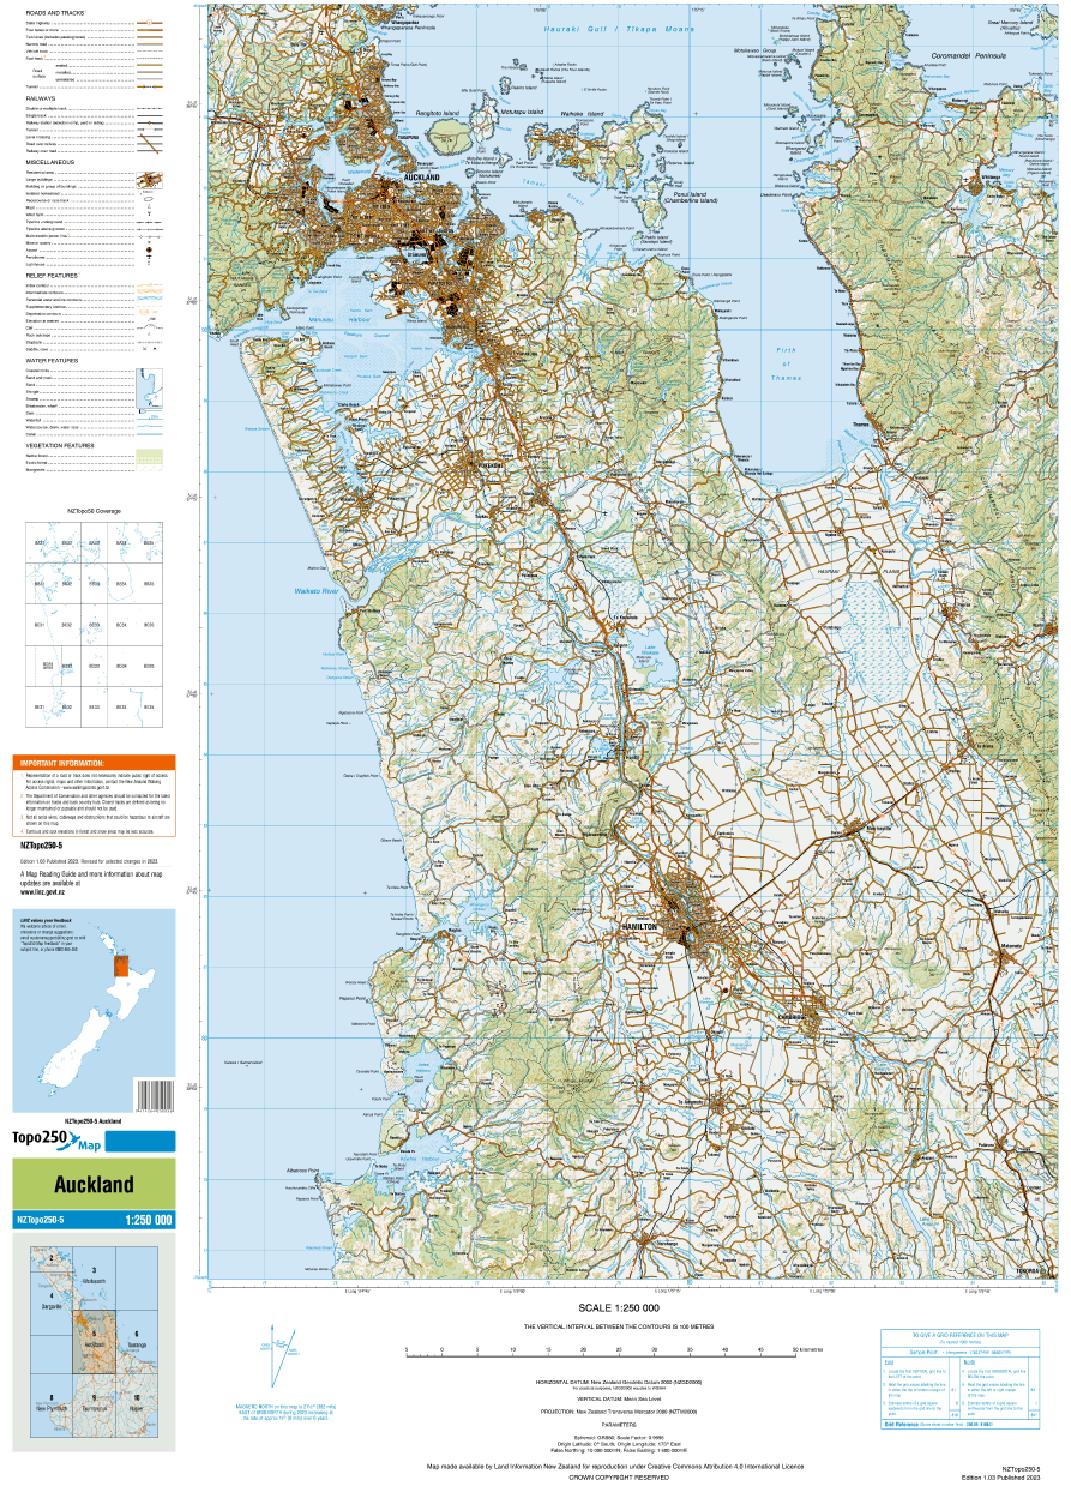 Topo map of Auckland